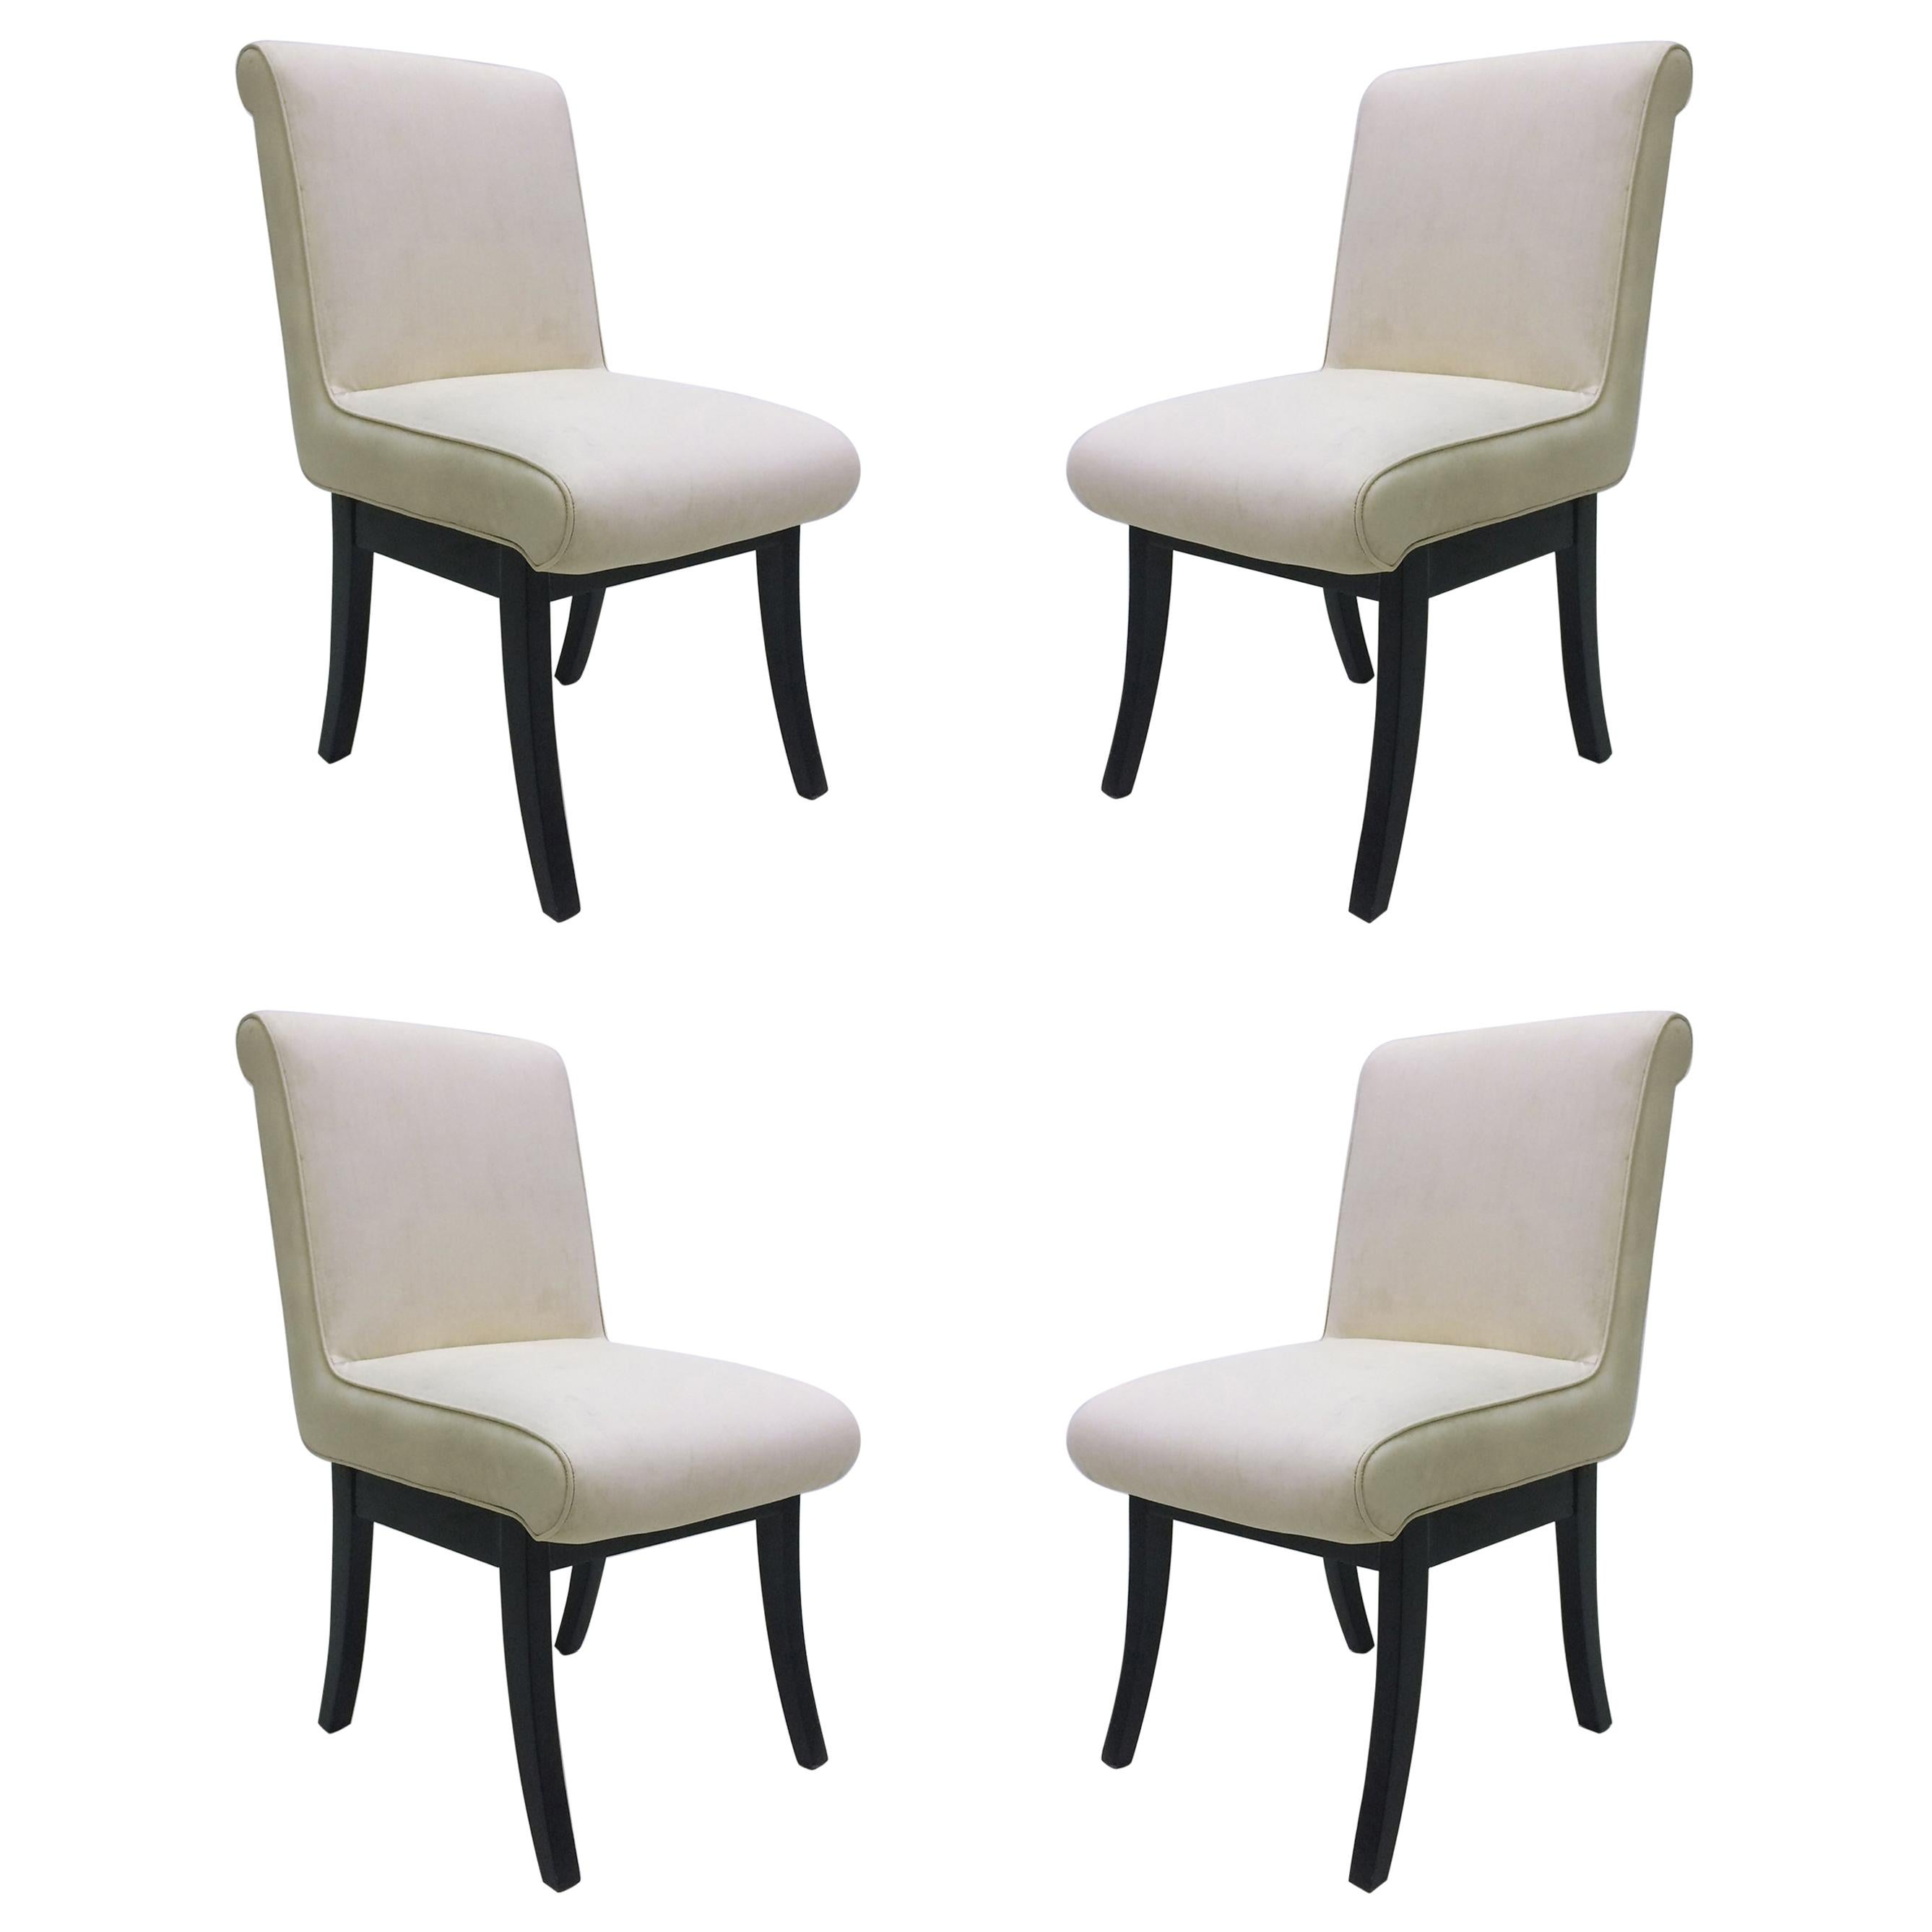 Set of 4 Van Keppel Dining Chairs